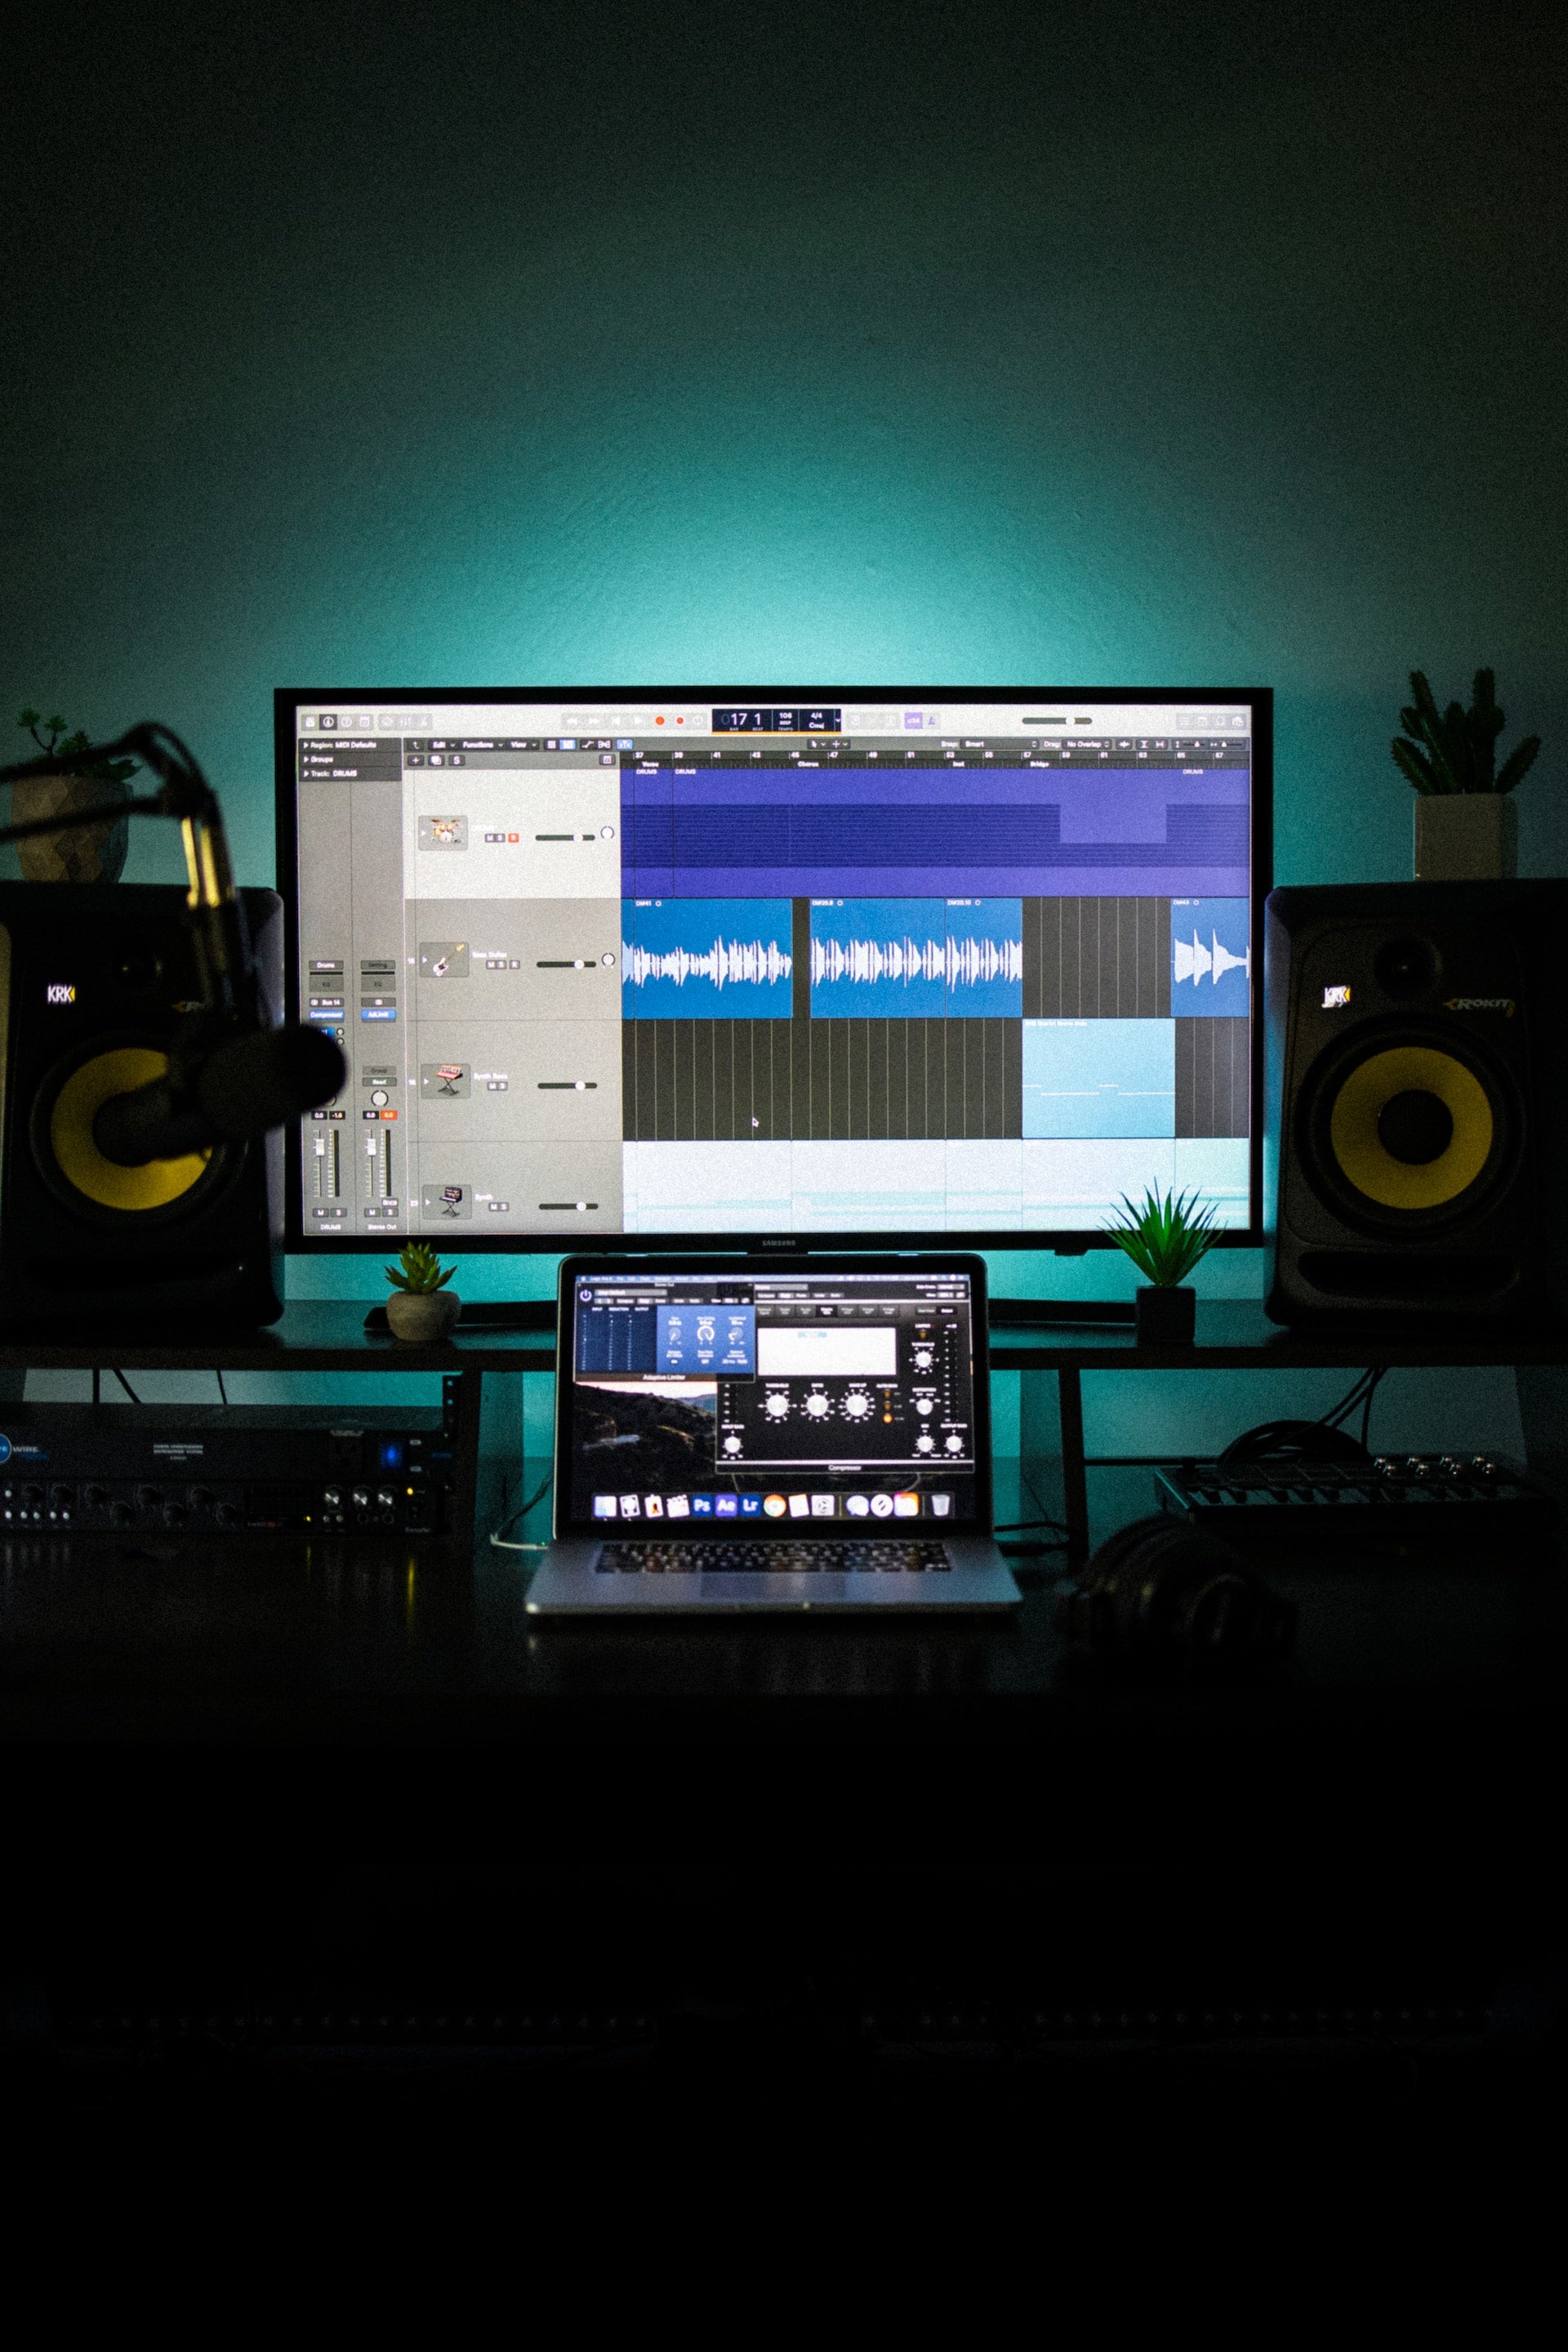 Logic pro software open on a macbook and a monitor behind it in a studio